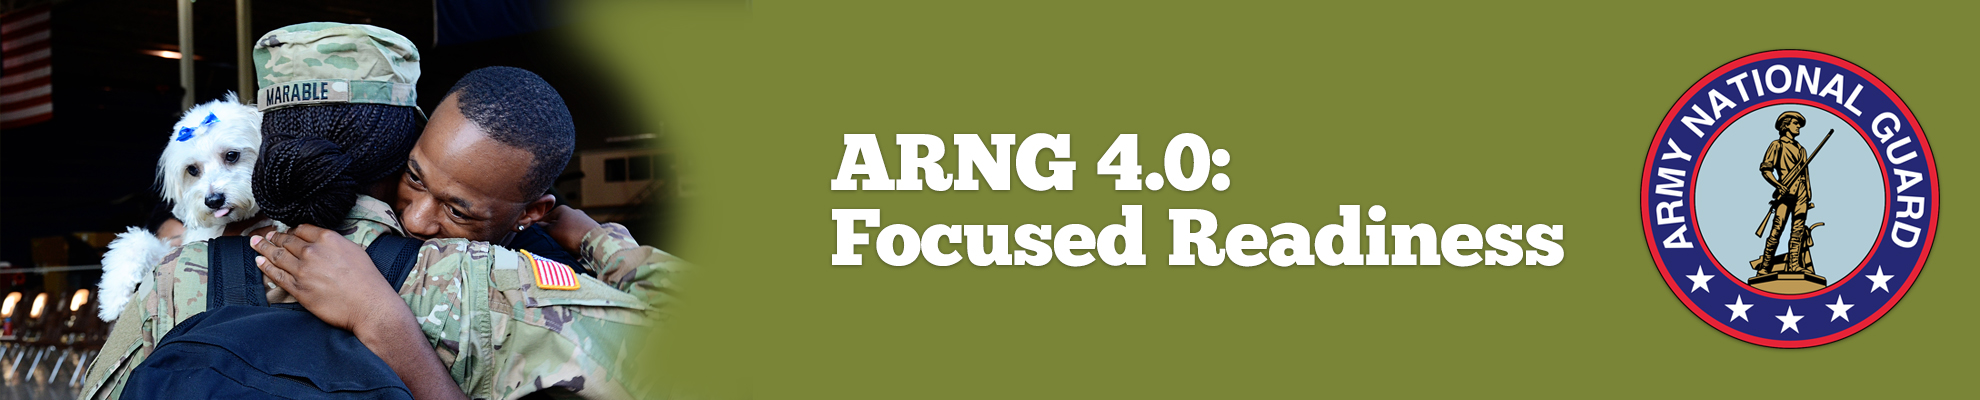 ARNG4.0: Focused Readiness